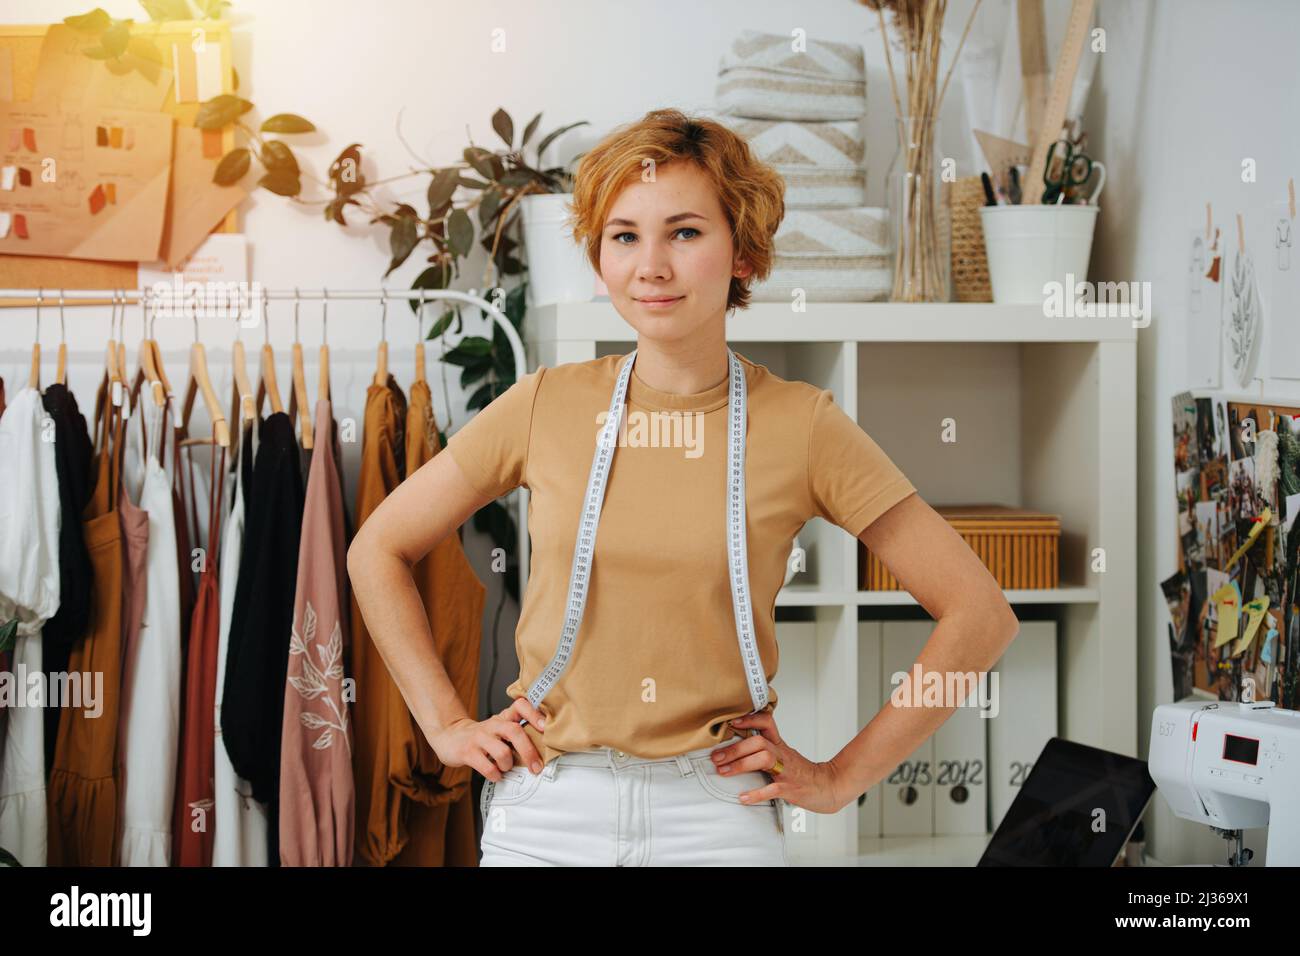 Proud seamstress posing for a photo in front of shelves and racks. Hands on hips. Meter hanging on her neck. She has short ginger dyed hair. Stock Photo